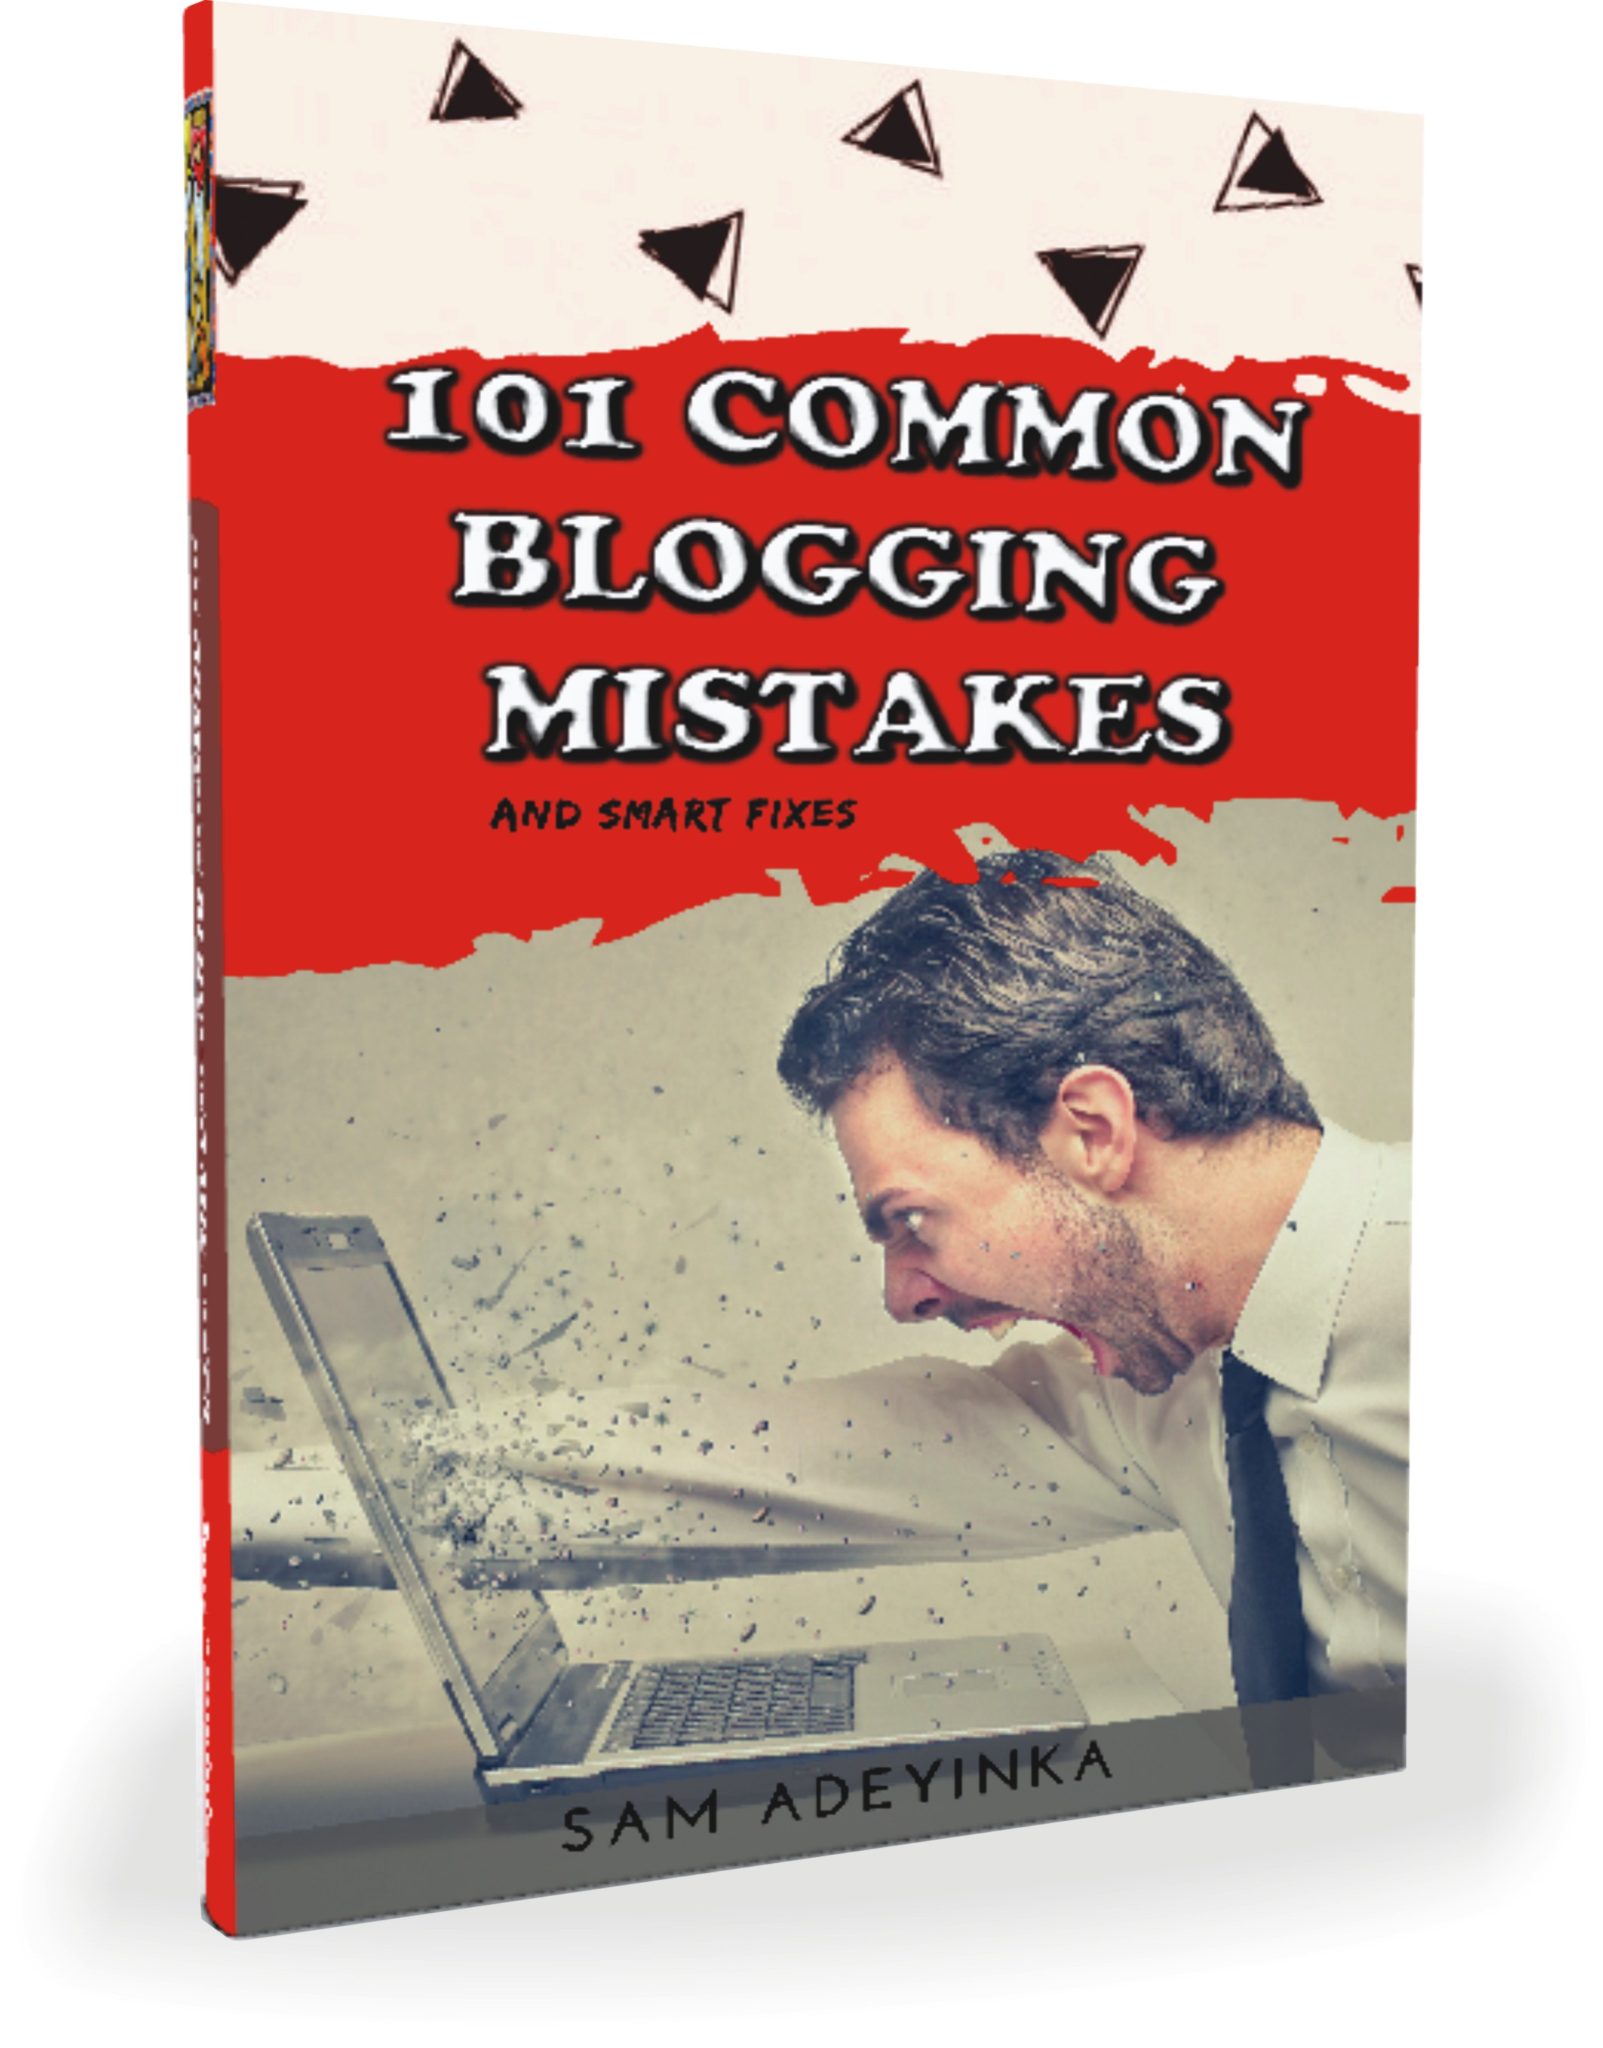 FREE: 101 Common Blogging Mistakes: And Smart Fixes by Sam Adeyinka